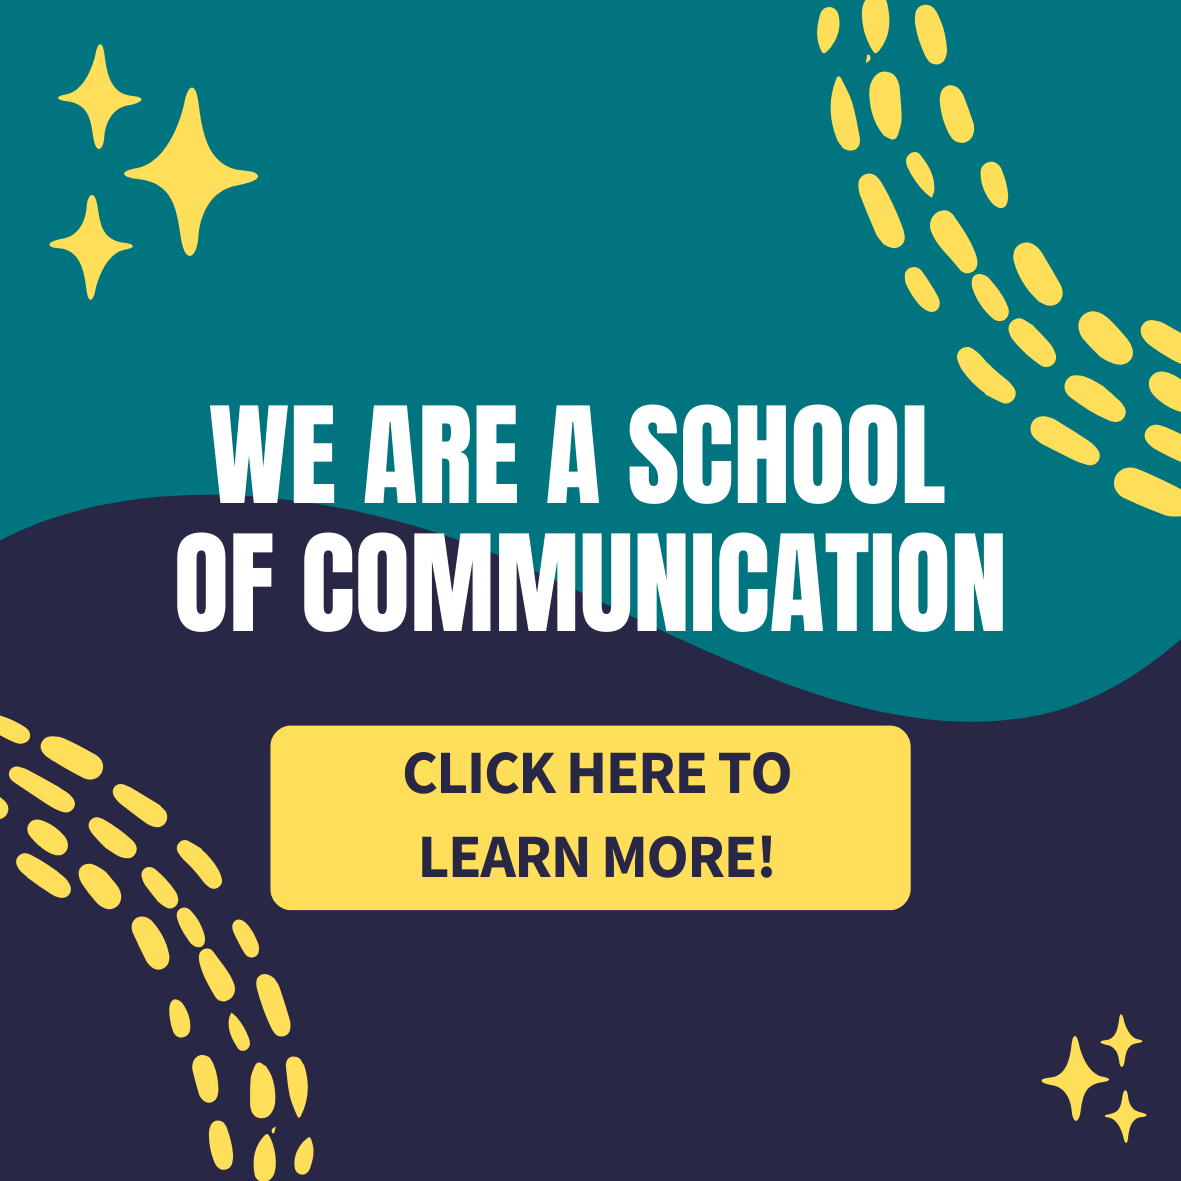 We are a School of Communication. Click here to learn more!